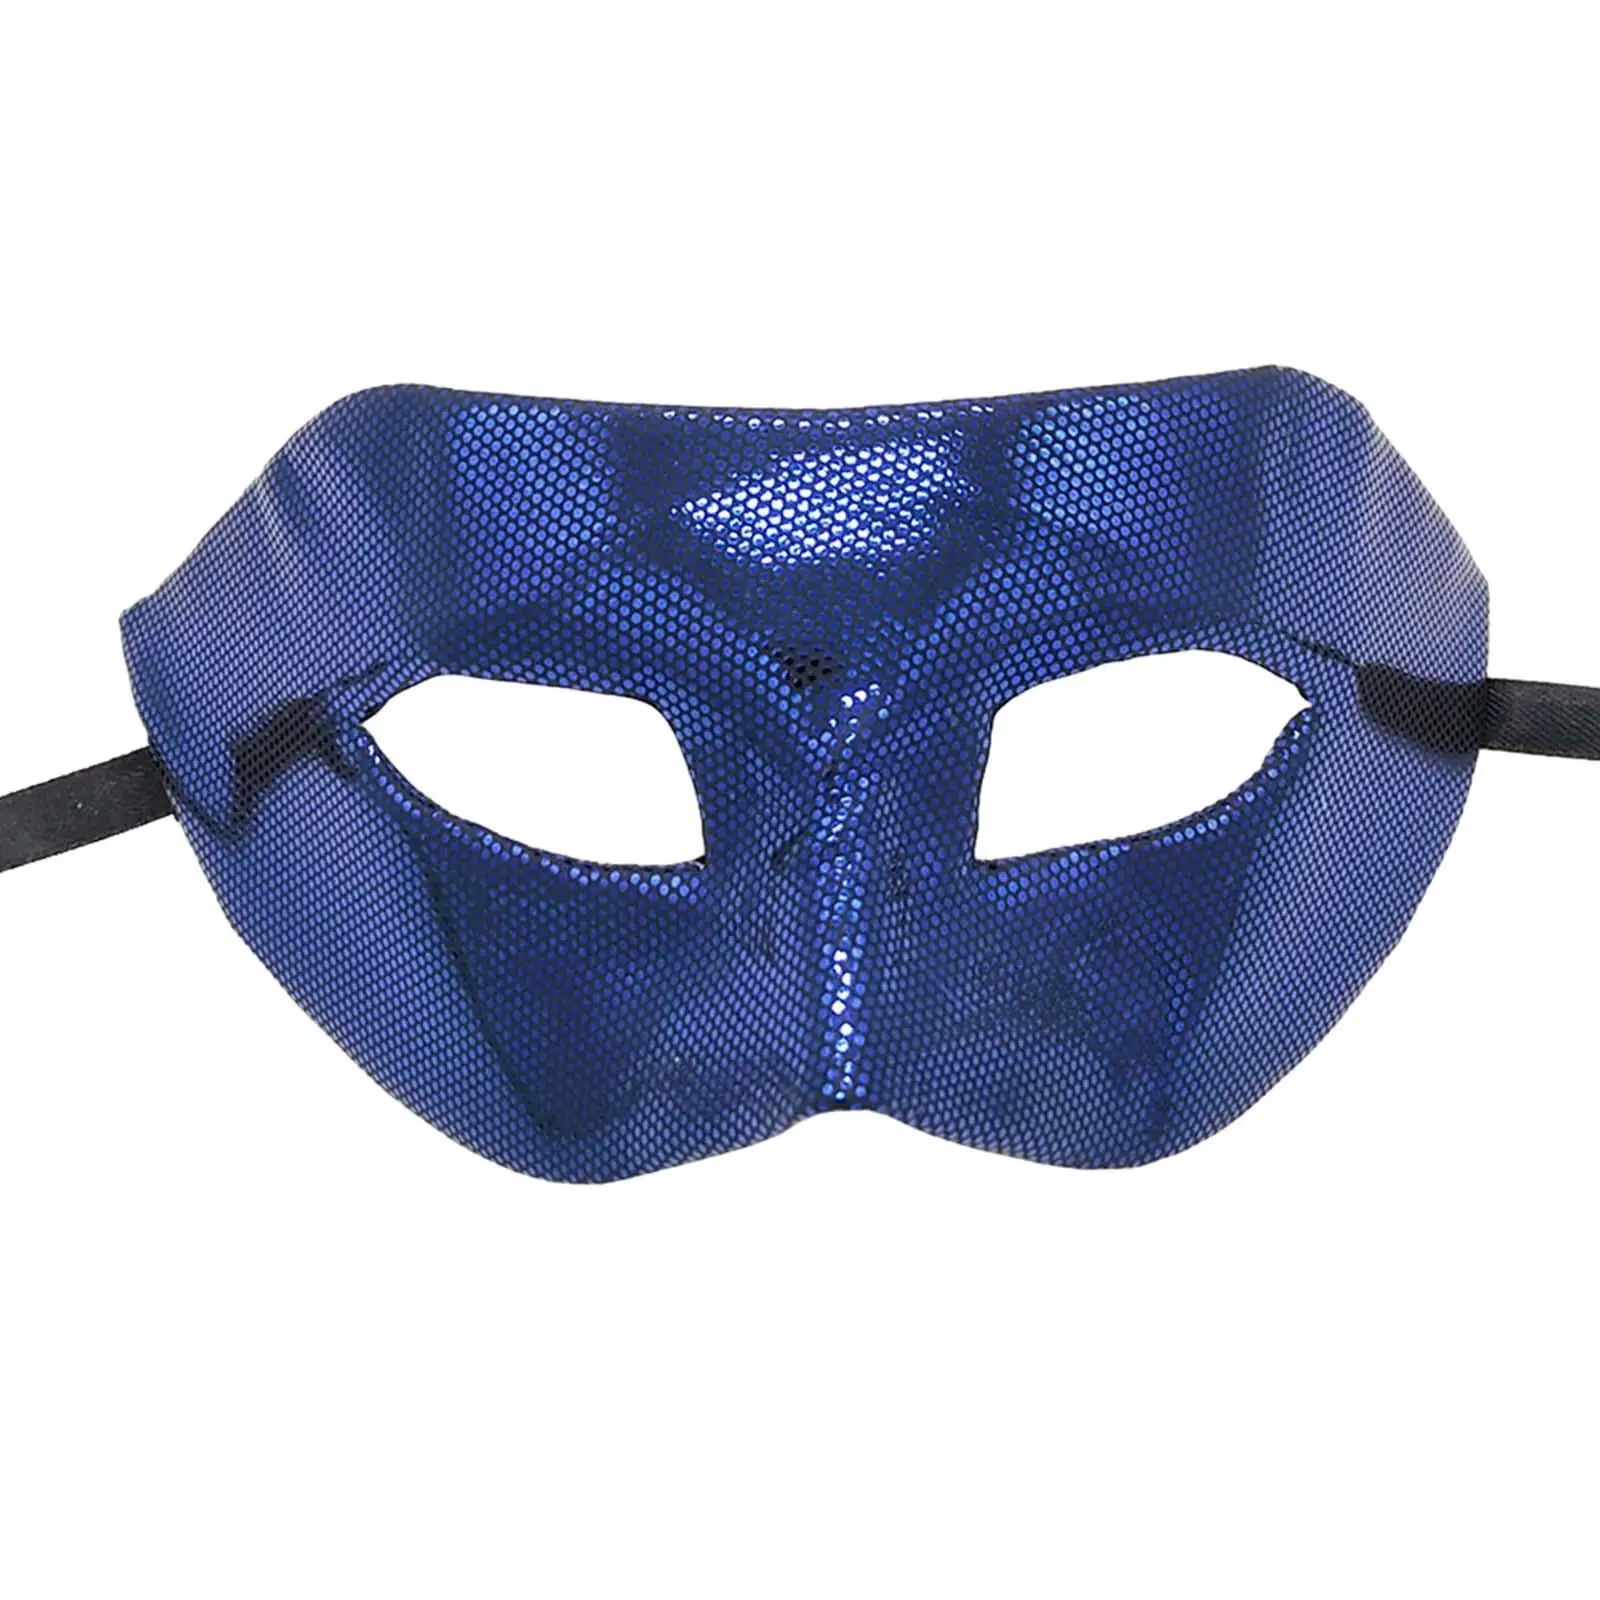 Masquerade Mask Cosplay Eye Mask Half Face Mask for Holiday Fancy Dress